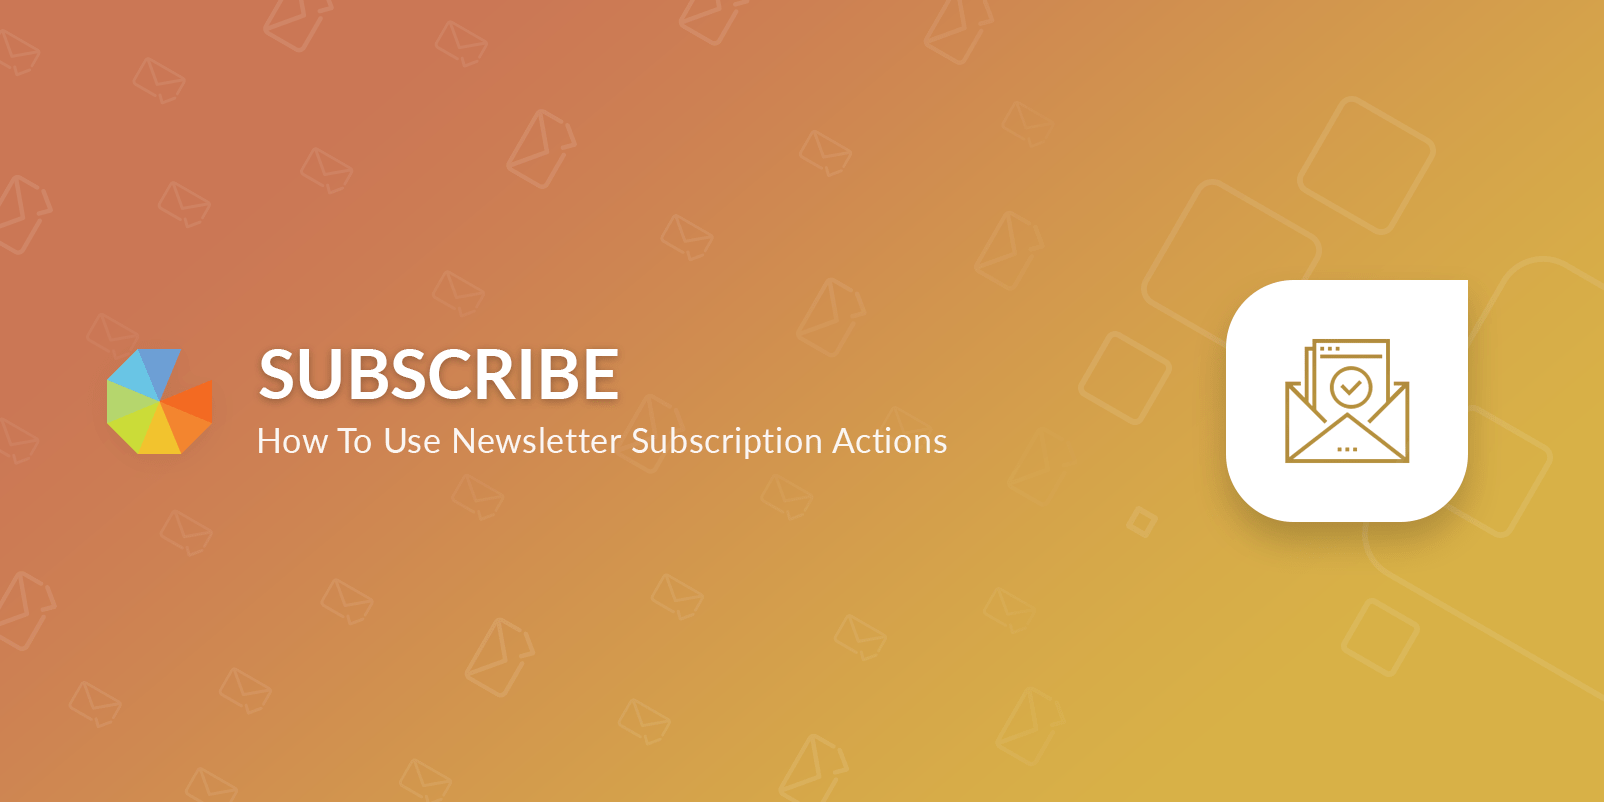 Subscribe to a Newsletter Action for Gleam.io